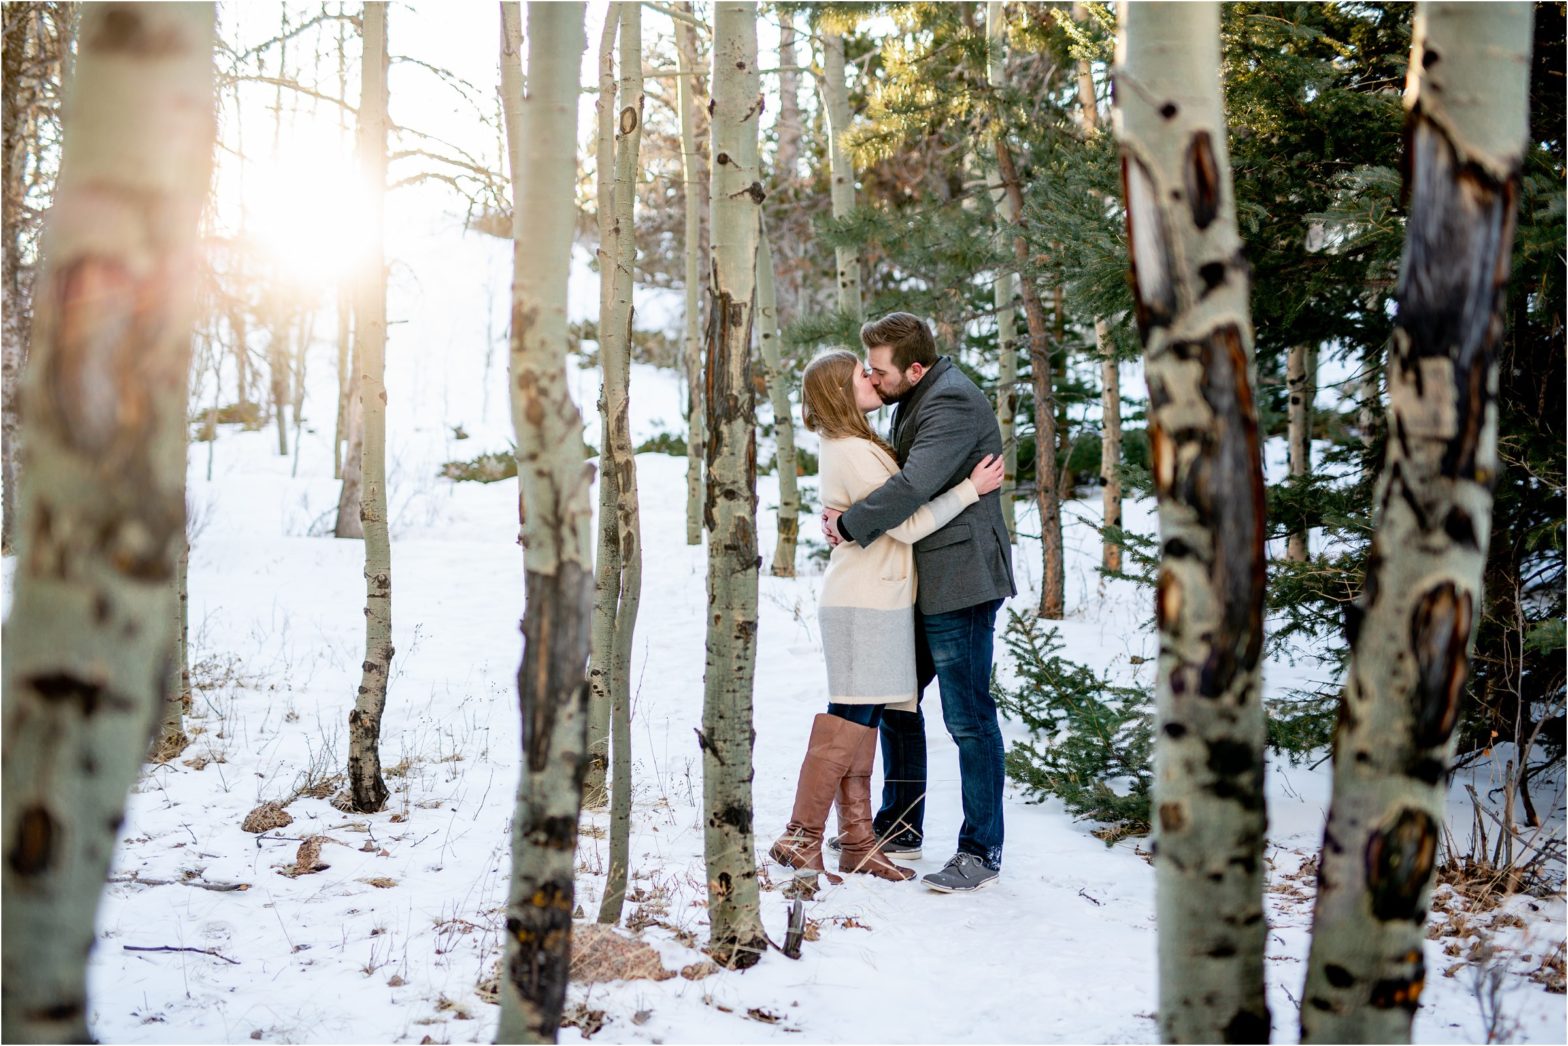 engaged couple snuggling in the snow with trees in the background